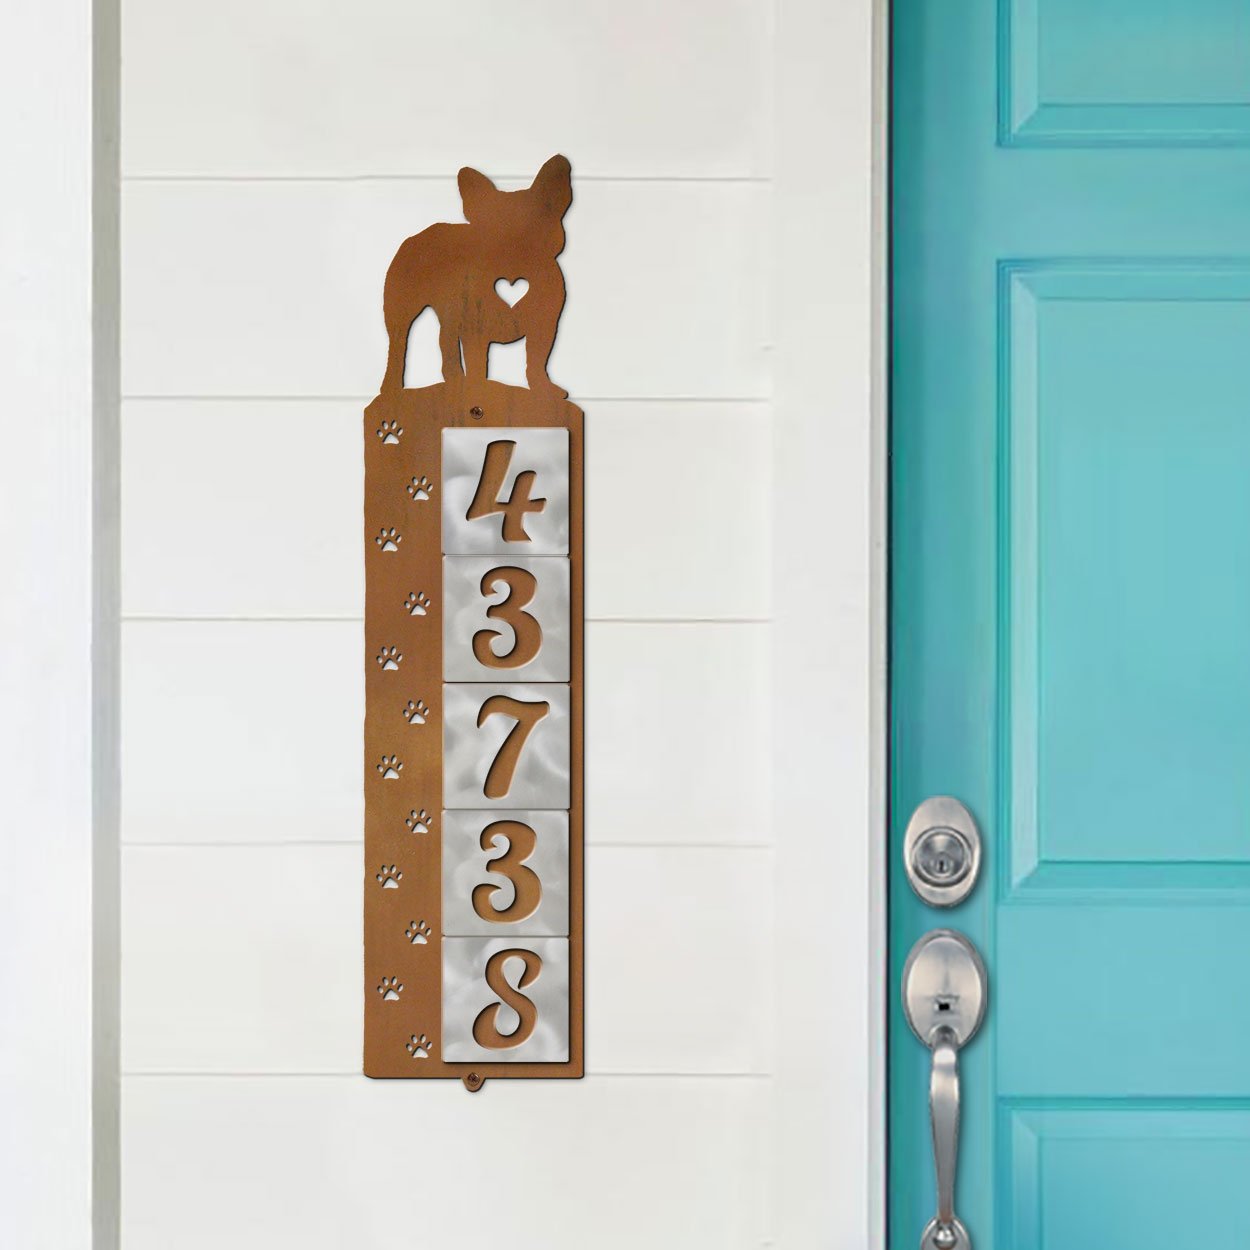 606215 - French Bulldog Nose Prints 5-Digit Vertical Tile House Numbers